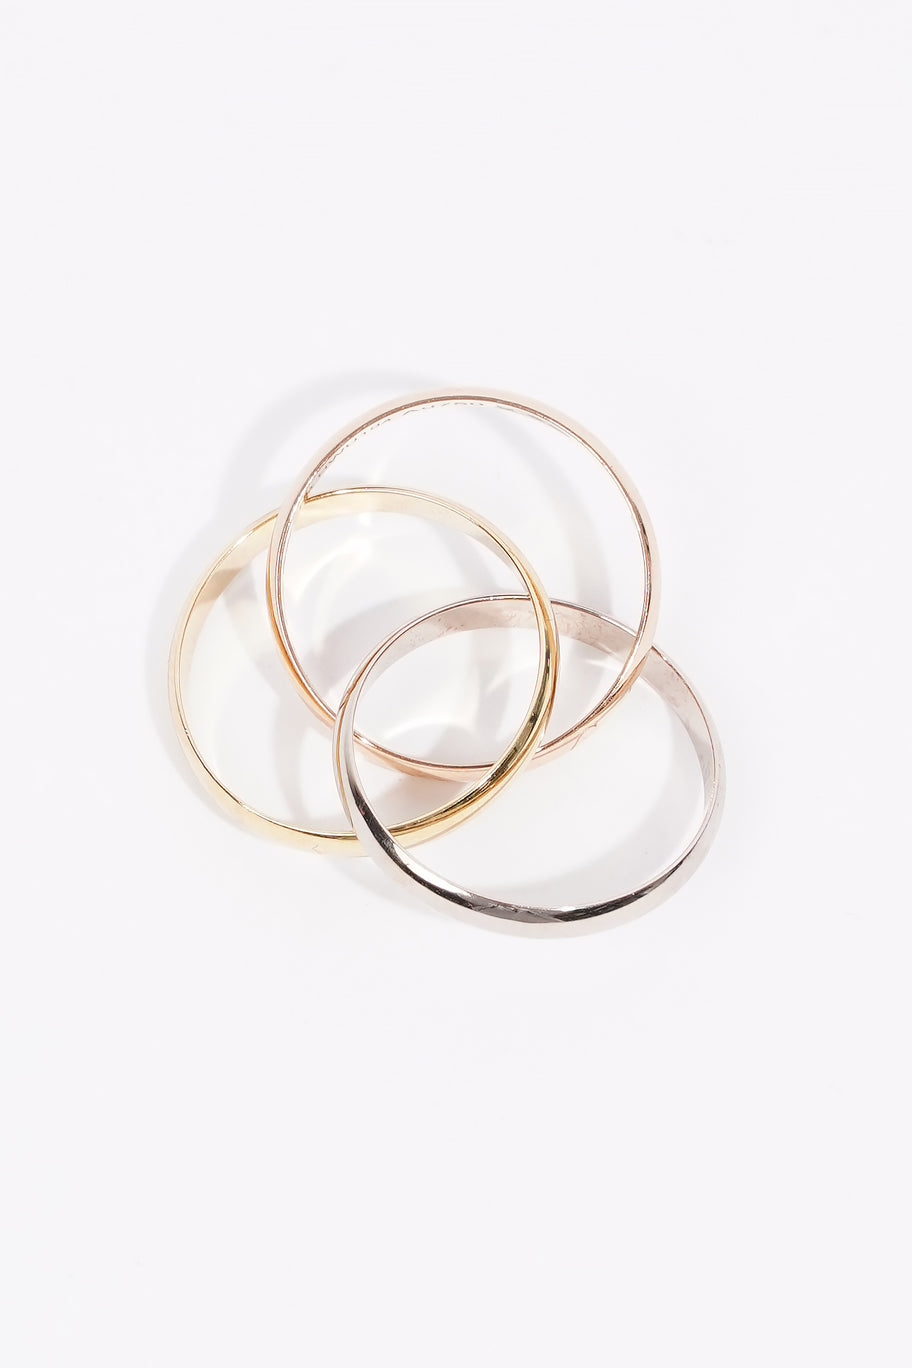 Trinity Ring, Small Model Rose Gold / White Gold Yellow Gold 54mm Image 4